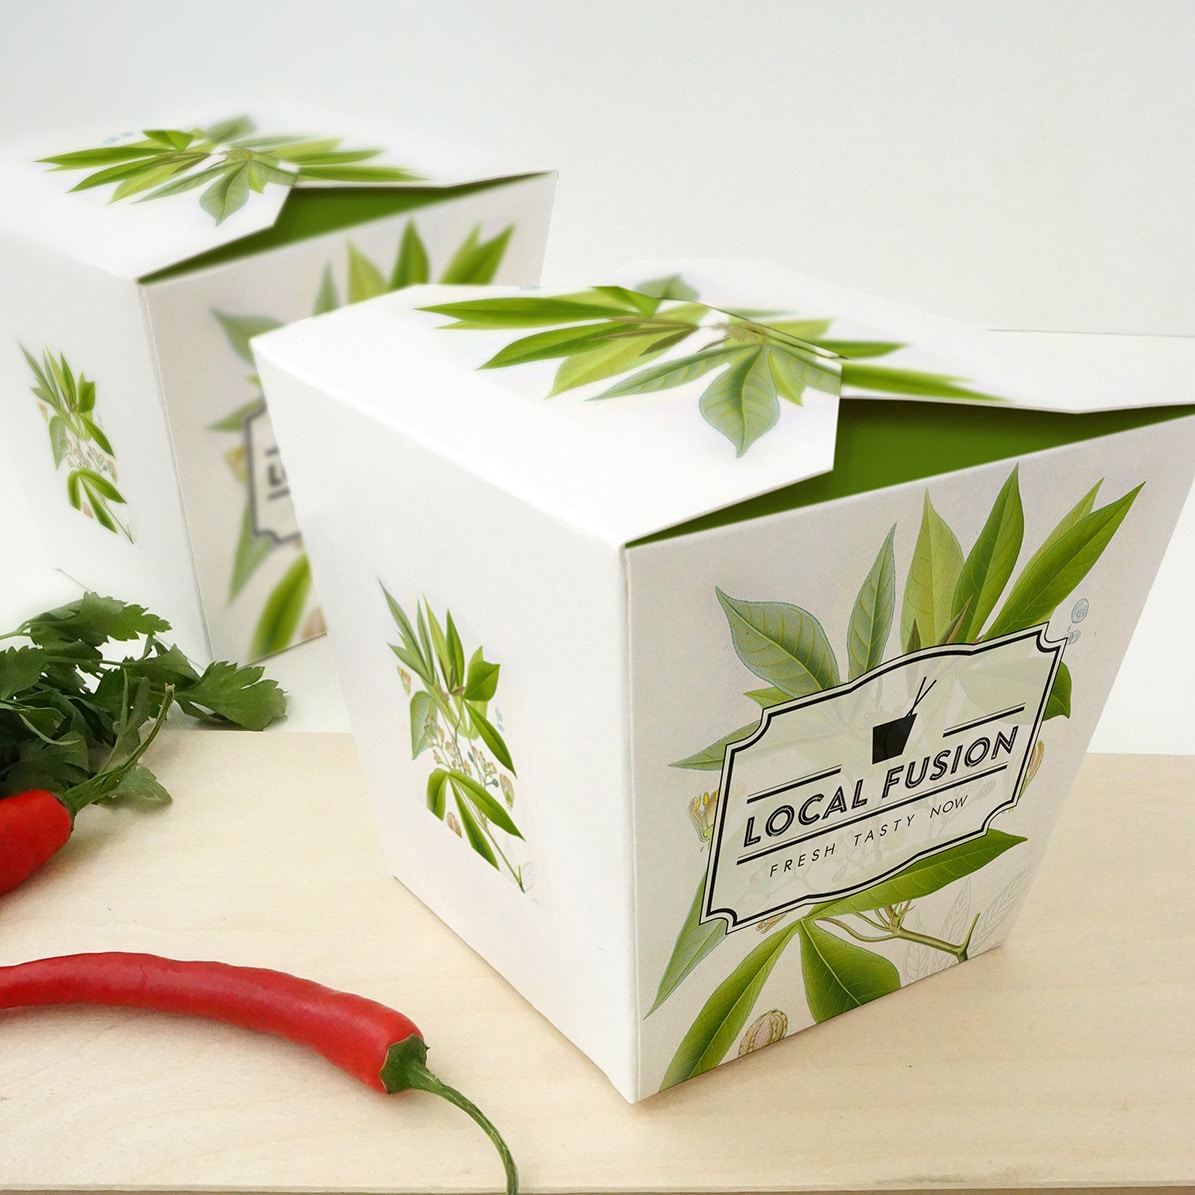 5 essential factors to consider when buying short run printed packaging for your company